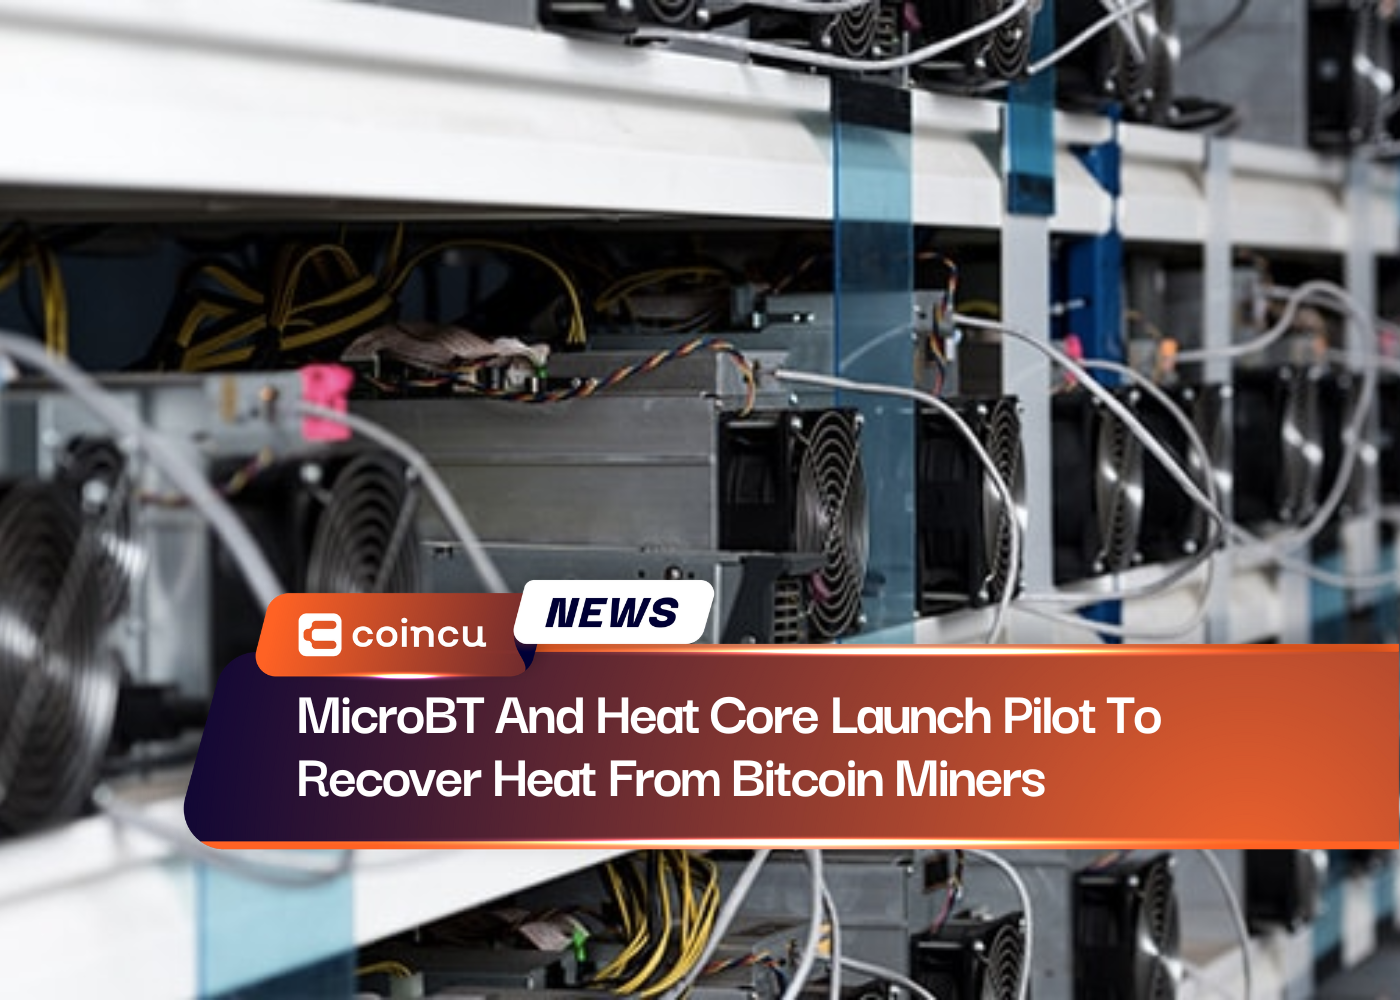 MicroBT And Heat Core Launch Pilot To Recover Heat From Bitcoin Miners